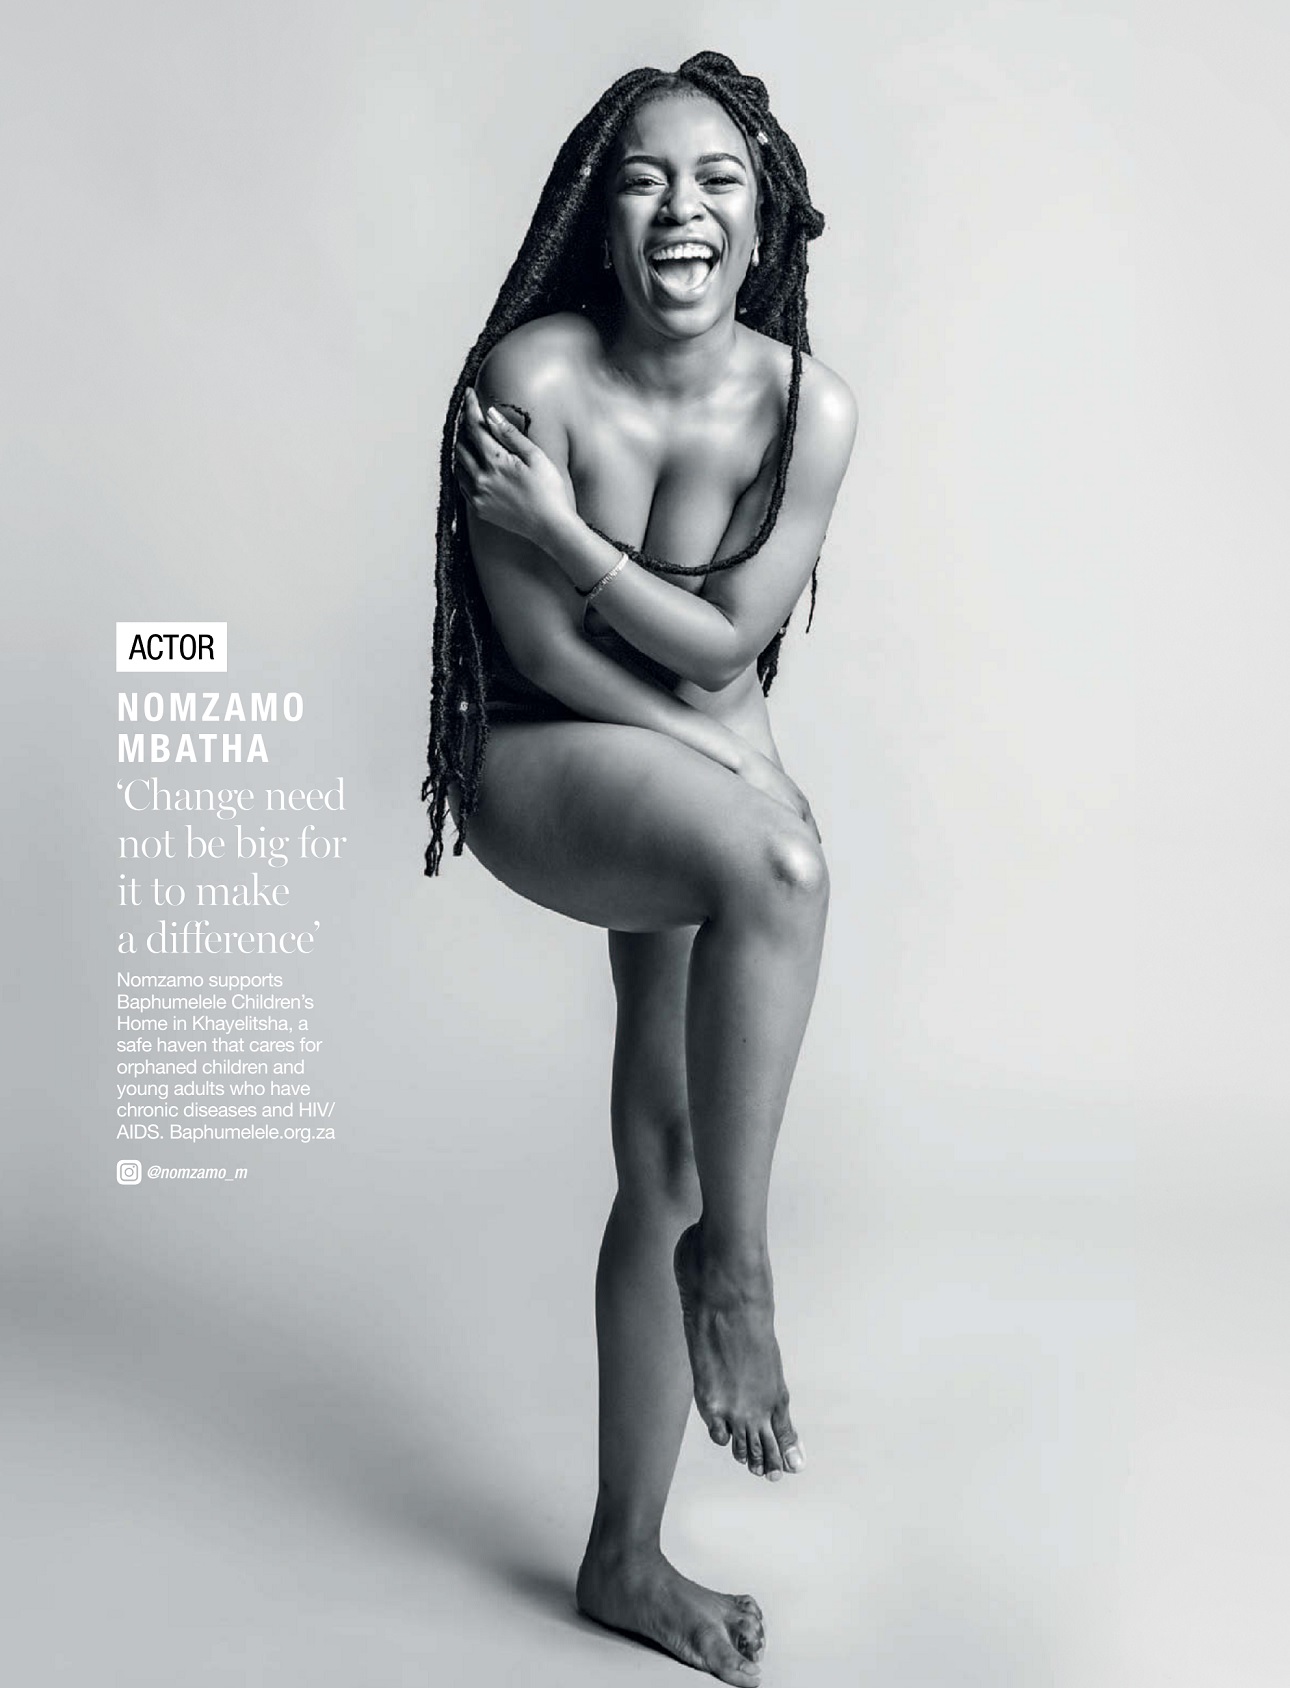 Nomzamo Mbatha and other local celebs strip down for worthy causes. more in...